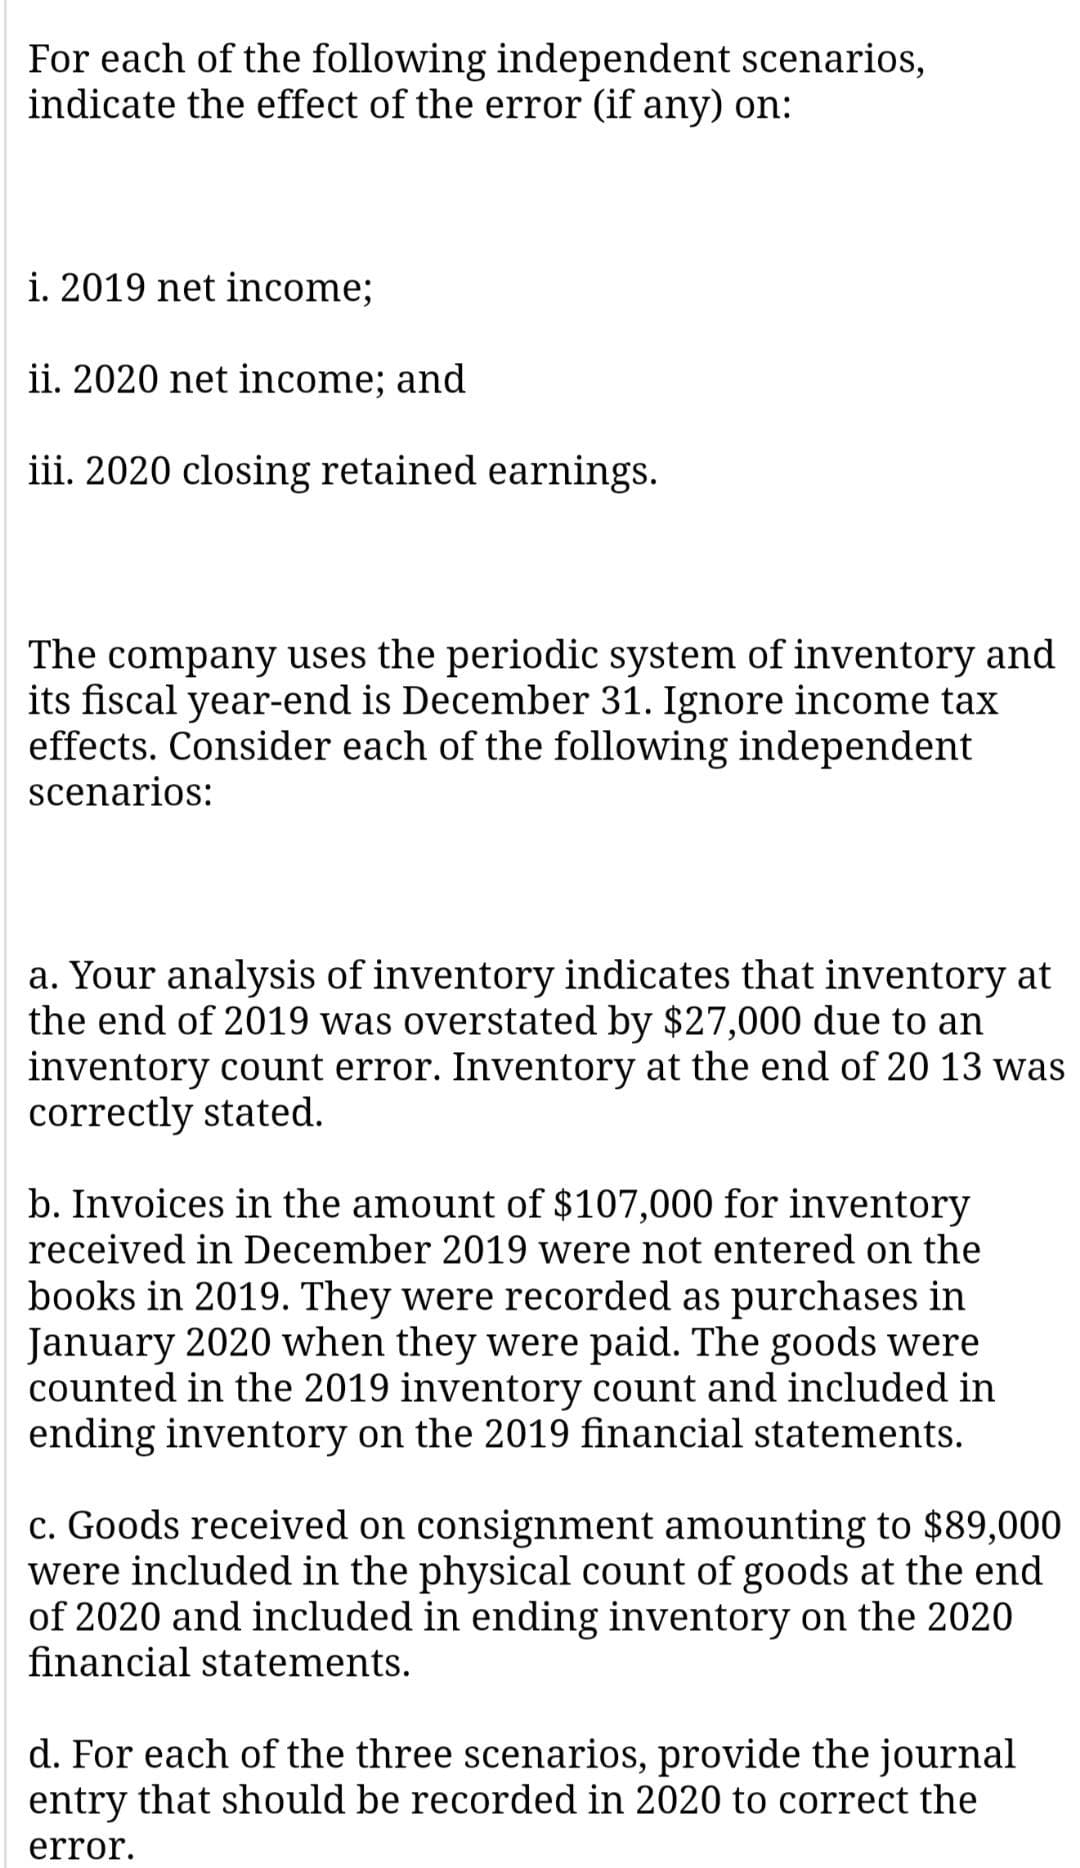 For each of the following independent scenarios,
indicate the effect of the error (if any) on:
i. 2019 net income;
ii. 2020 net income; and
iii. 2020 closing retained earnings.
company uses the periodic system of inventory and
its fiscal year-end is December 31. Ignore income tax
effects. Consider each of the following independent
The
scenarios:
a. Your analysis of inventory indicates that inventory at
the end of 2019 was overstated by $27,000 due to an
inventory count error. Inventory at the end of 20 13 was
correctly stated.
b. Invoices in the amount of $107,000 for inventory
received in December 2019 were not entered on the
books in 2019. They were recorded as purchases in
January 2020 when they were paid. The goods were
counted in the 2019 inventory count and included in
ending inventory on the 2019 financial statements.
c. Goods received on consignment amounting to $89,000
were included in the physical count of goods at the end
of 2020 and included in ending inventory on the 2020
financial statements.
d. For each of the three scenarios, provide the journal
entry that should be recorded in 2020 to correct the
error.
